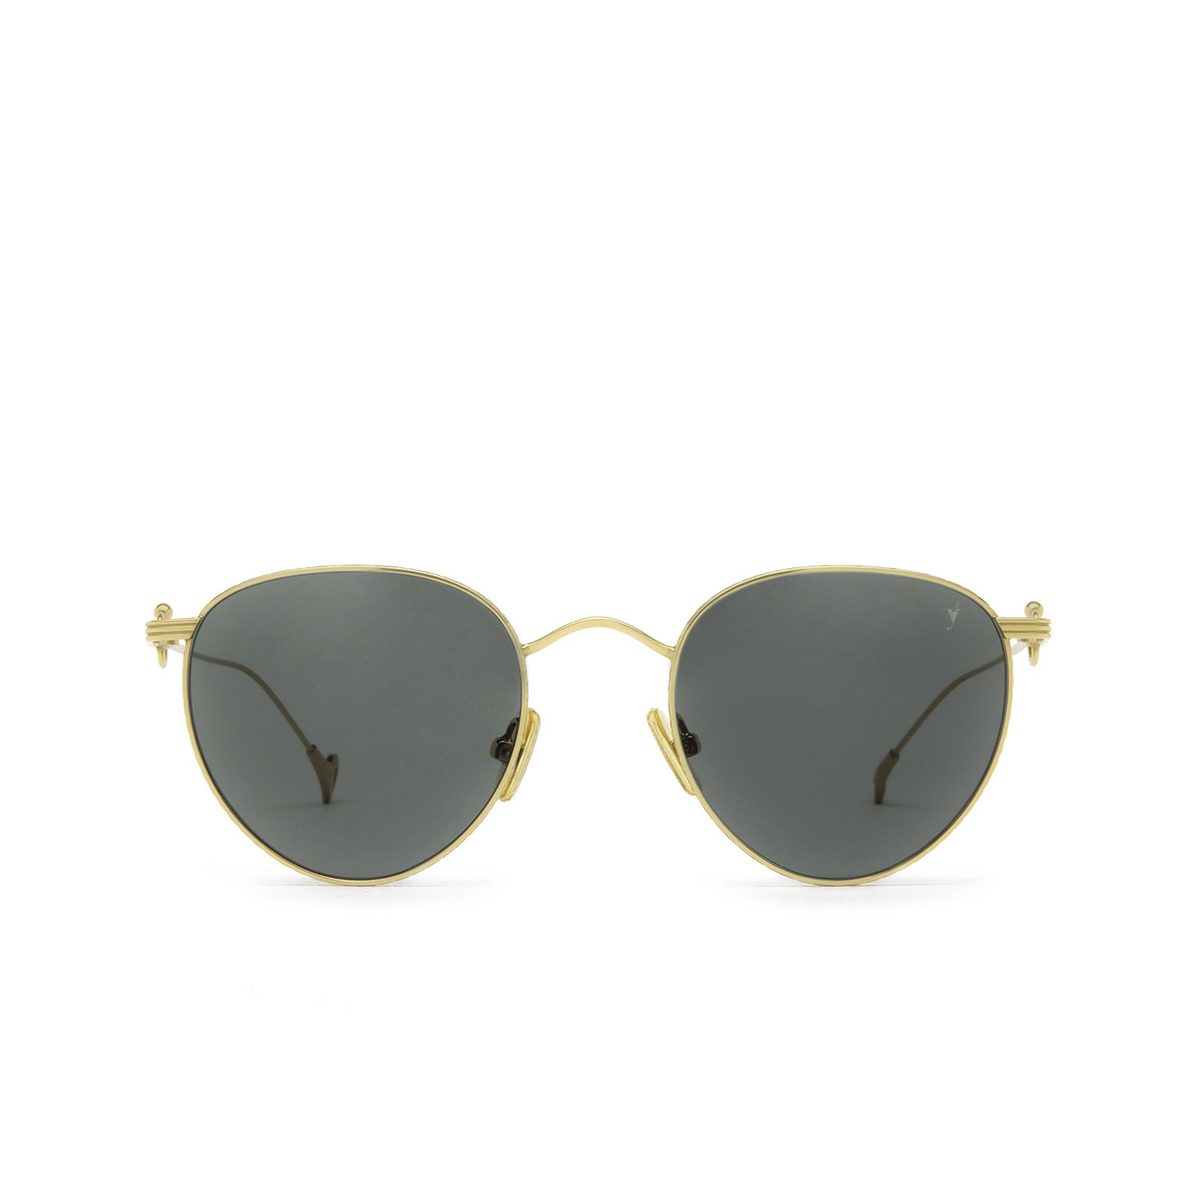 Eyepetizer® Round Sunglasses: Lune color Gold C.4-40 - front view.